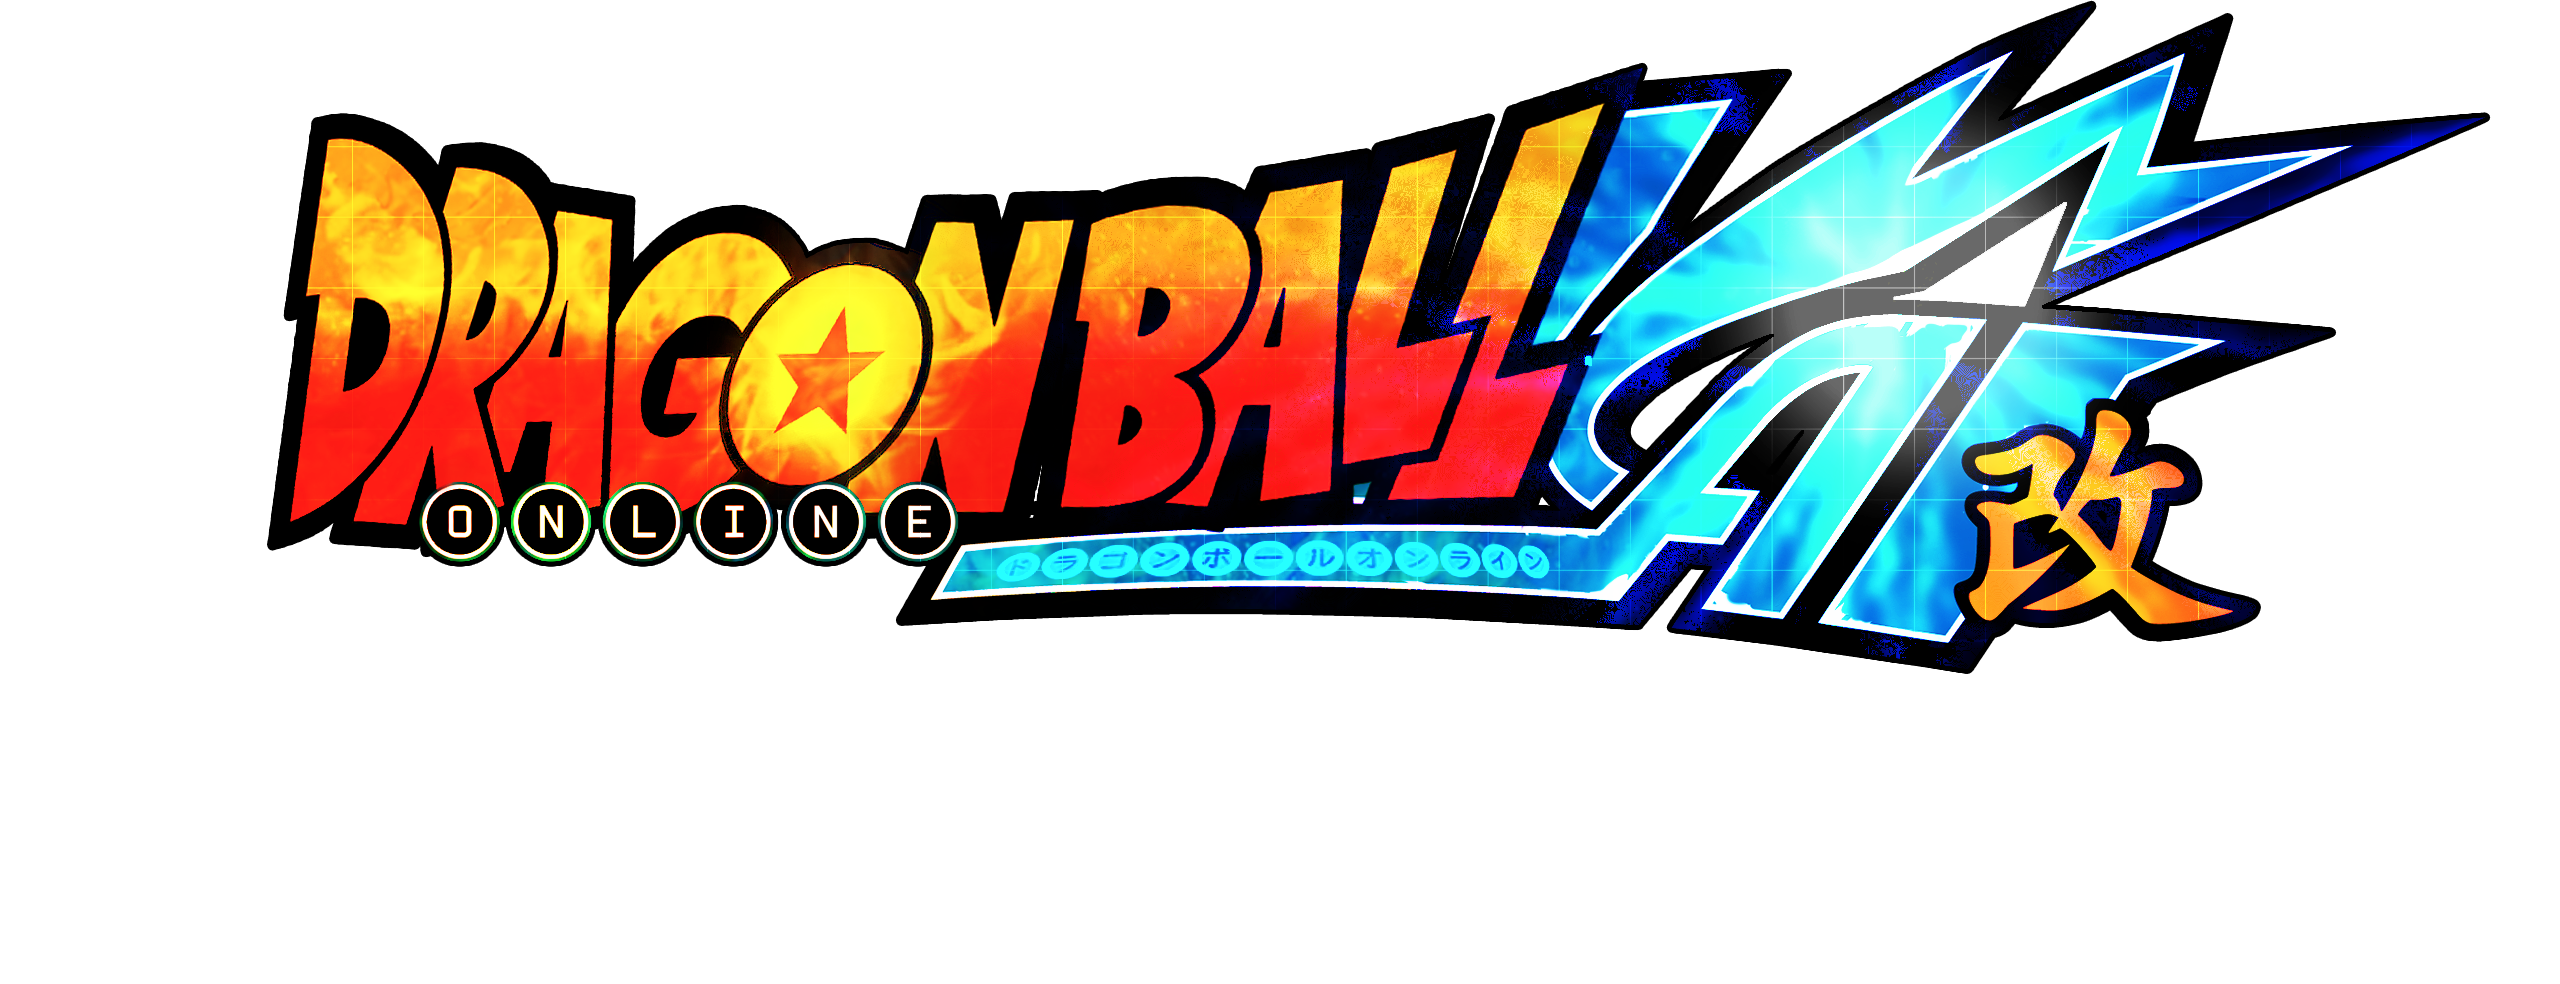 Dragon ball online - Project